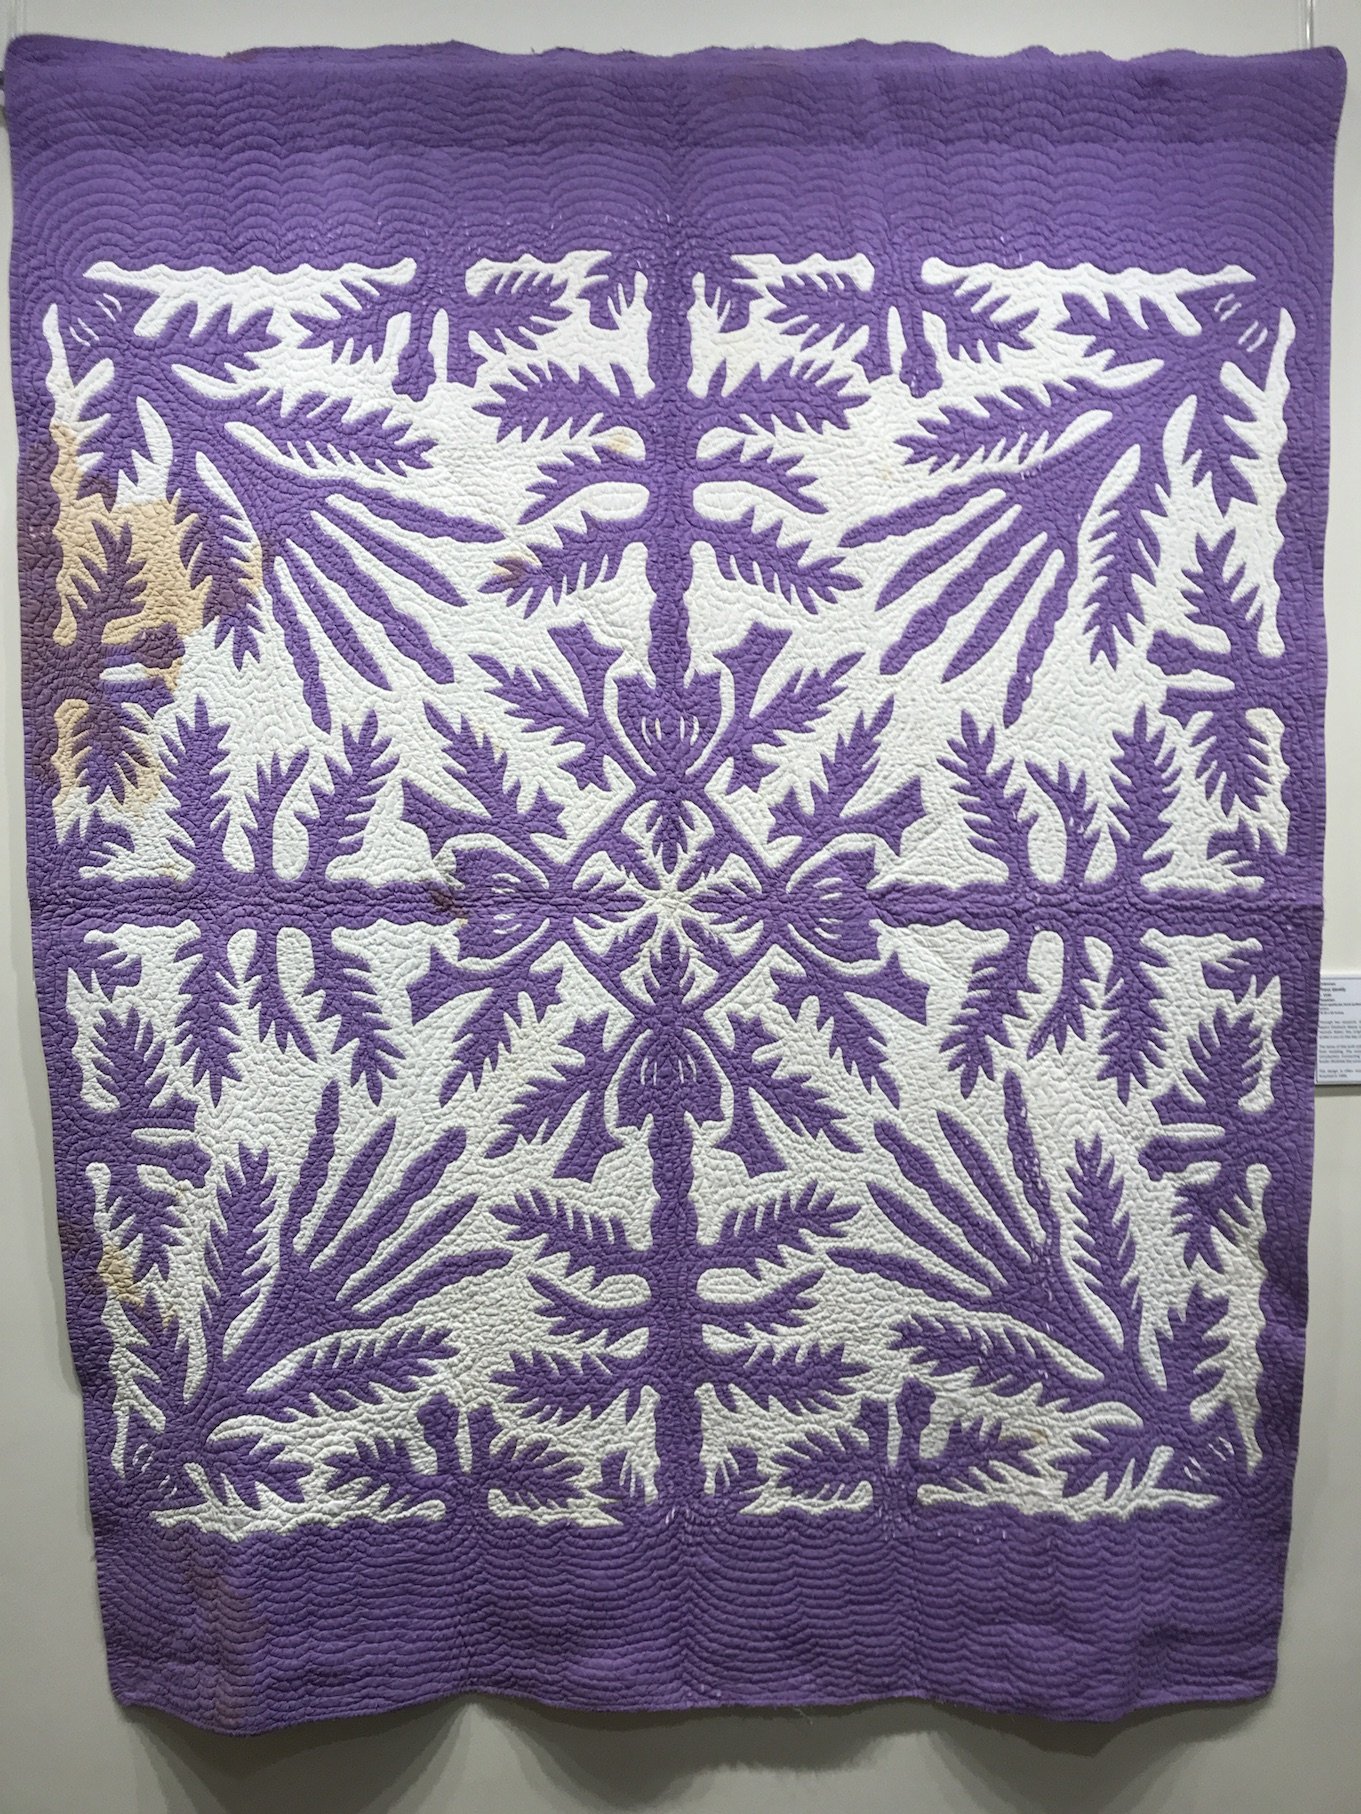 First L. reccomend Asian needlework 1940s